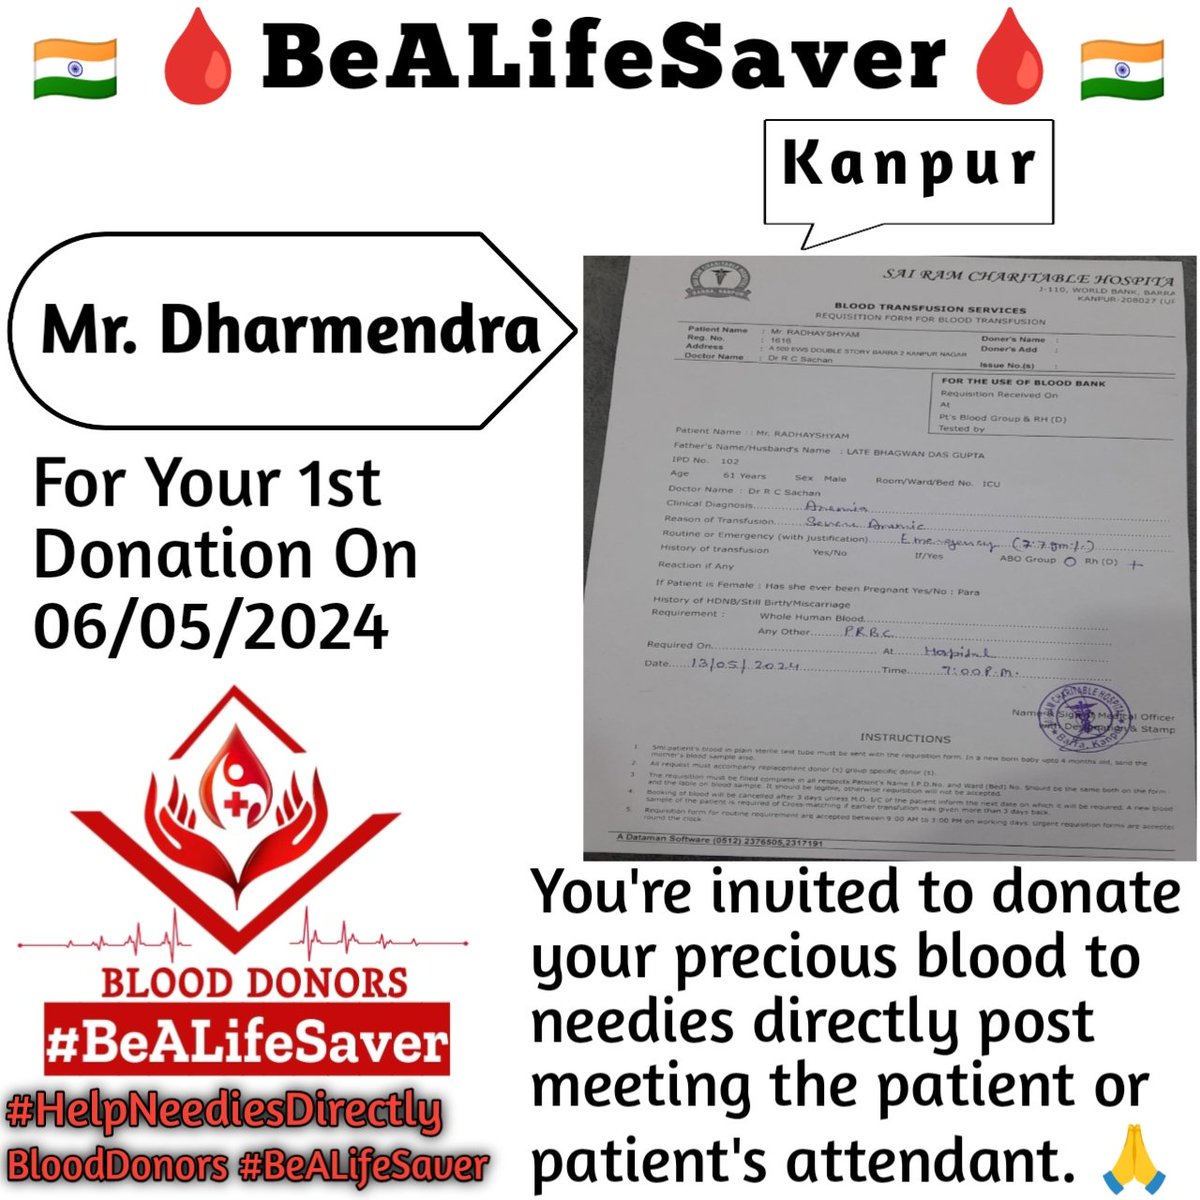 🙏 Congratulations Debutant 🙏
Kanpur BeALifeSaver
Kudos_Mr_Dharmendra_Ji

Today's hero
Mr. Dharmendra Ji donated blood in Kanpur for the 1st Time for one of the needies. Heartfelt Gratitude and Respect to Dharmendra Ji for his blood donation for Patient admitted in Kanpur.